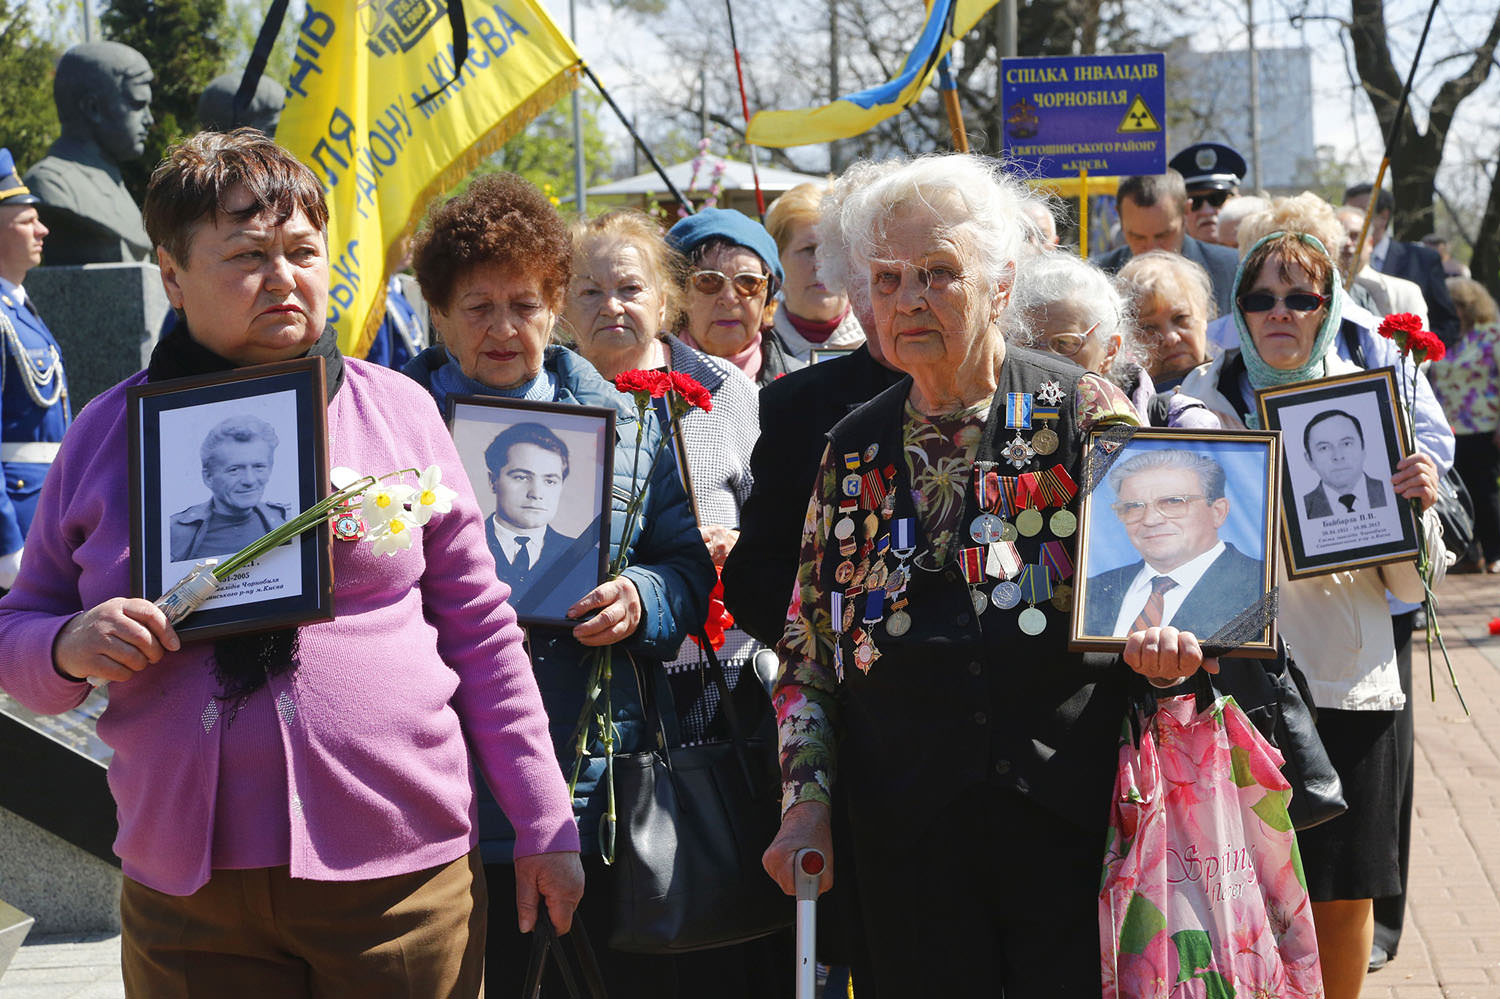 chernobyl victim wives hold pictures of their beloved husbands